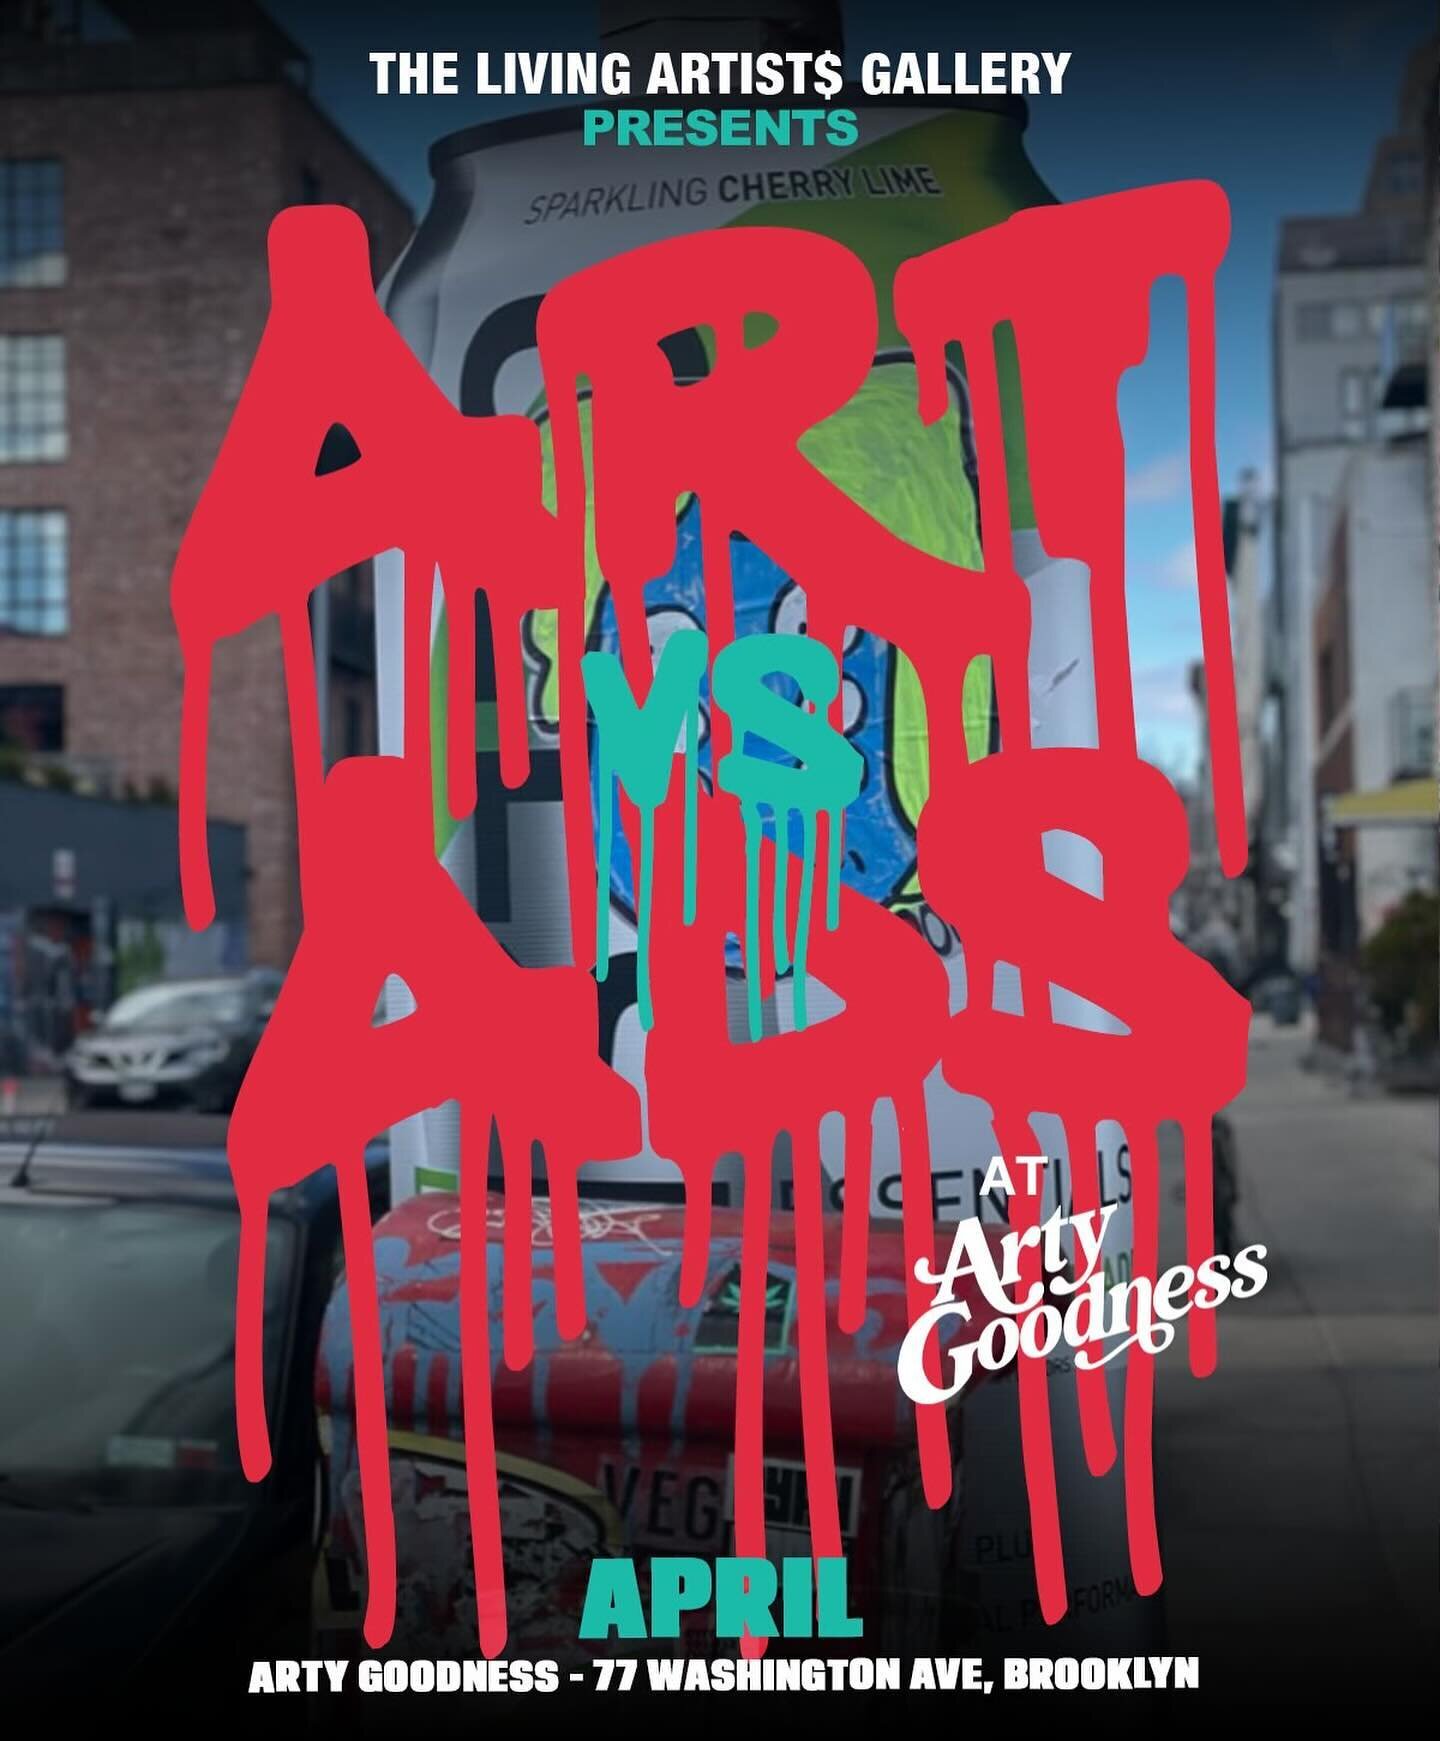 🔥APRIL 12🔥
 
ART vs ADS, a group show curated by The Living Artist$ Gallery.

Opening Reception Fri April 12, 7-10pm✨

Arty Goodness ⚡ artygoodness.com
📍77 Washington Ave. Brooklyn NY 11205

ART vs ADS, featuring art by
@aicmosaic
@buttsup
@cruzmo